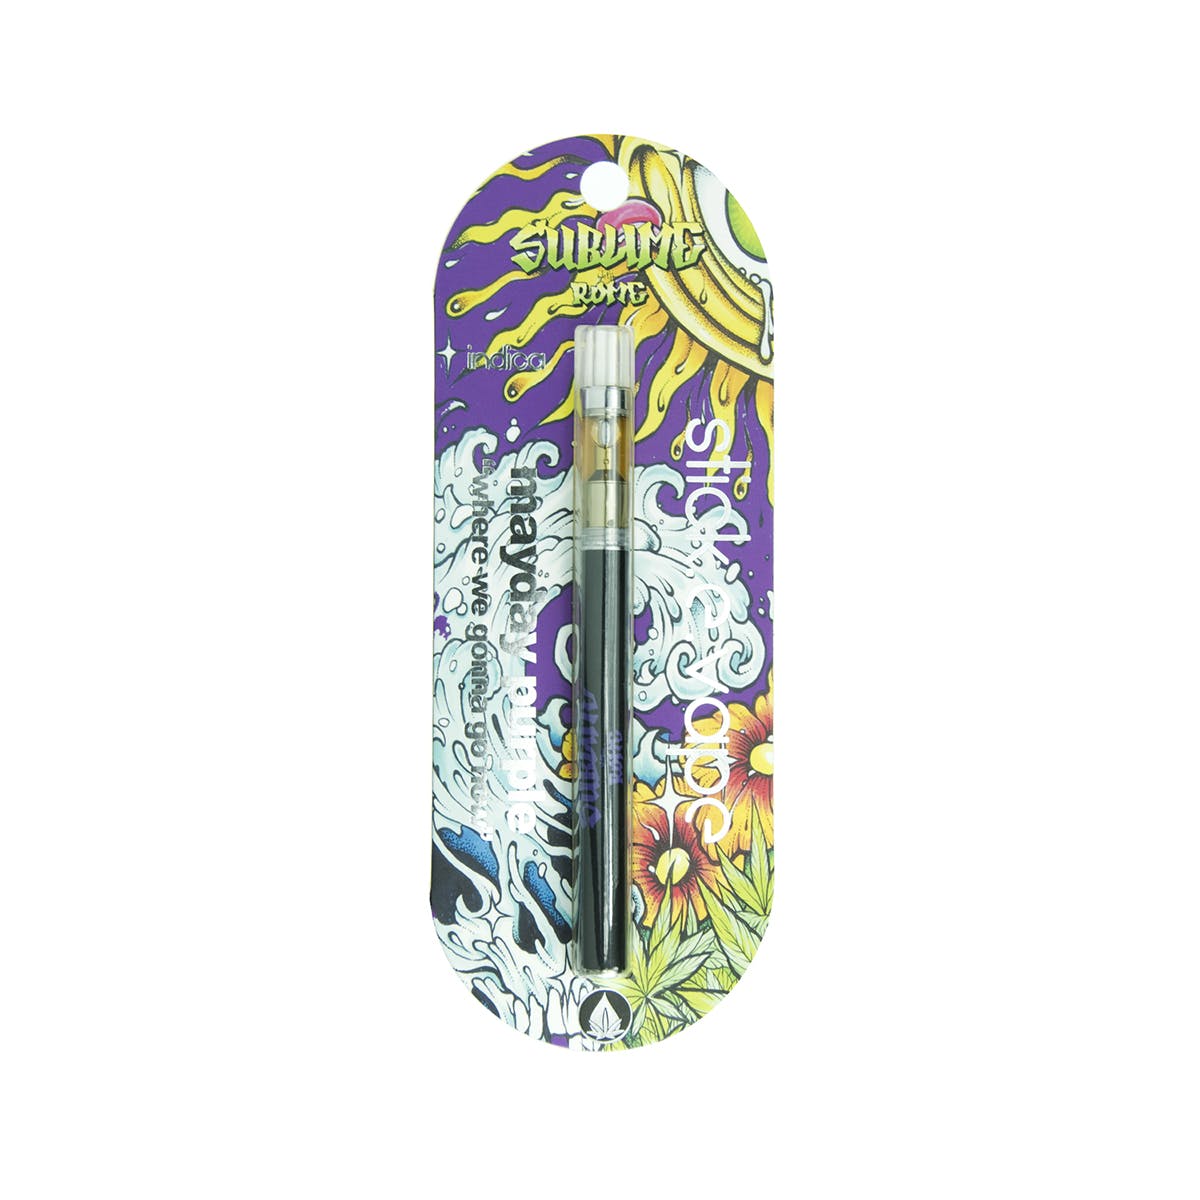 marijuana-dispensaries-city-compassionate-caregivers-ccc-in-los-angeles-sublime-a-rome-mayday-purple-disposable-pen